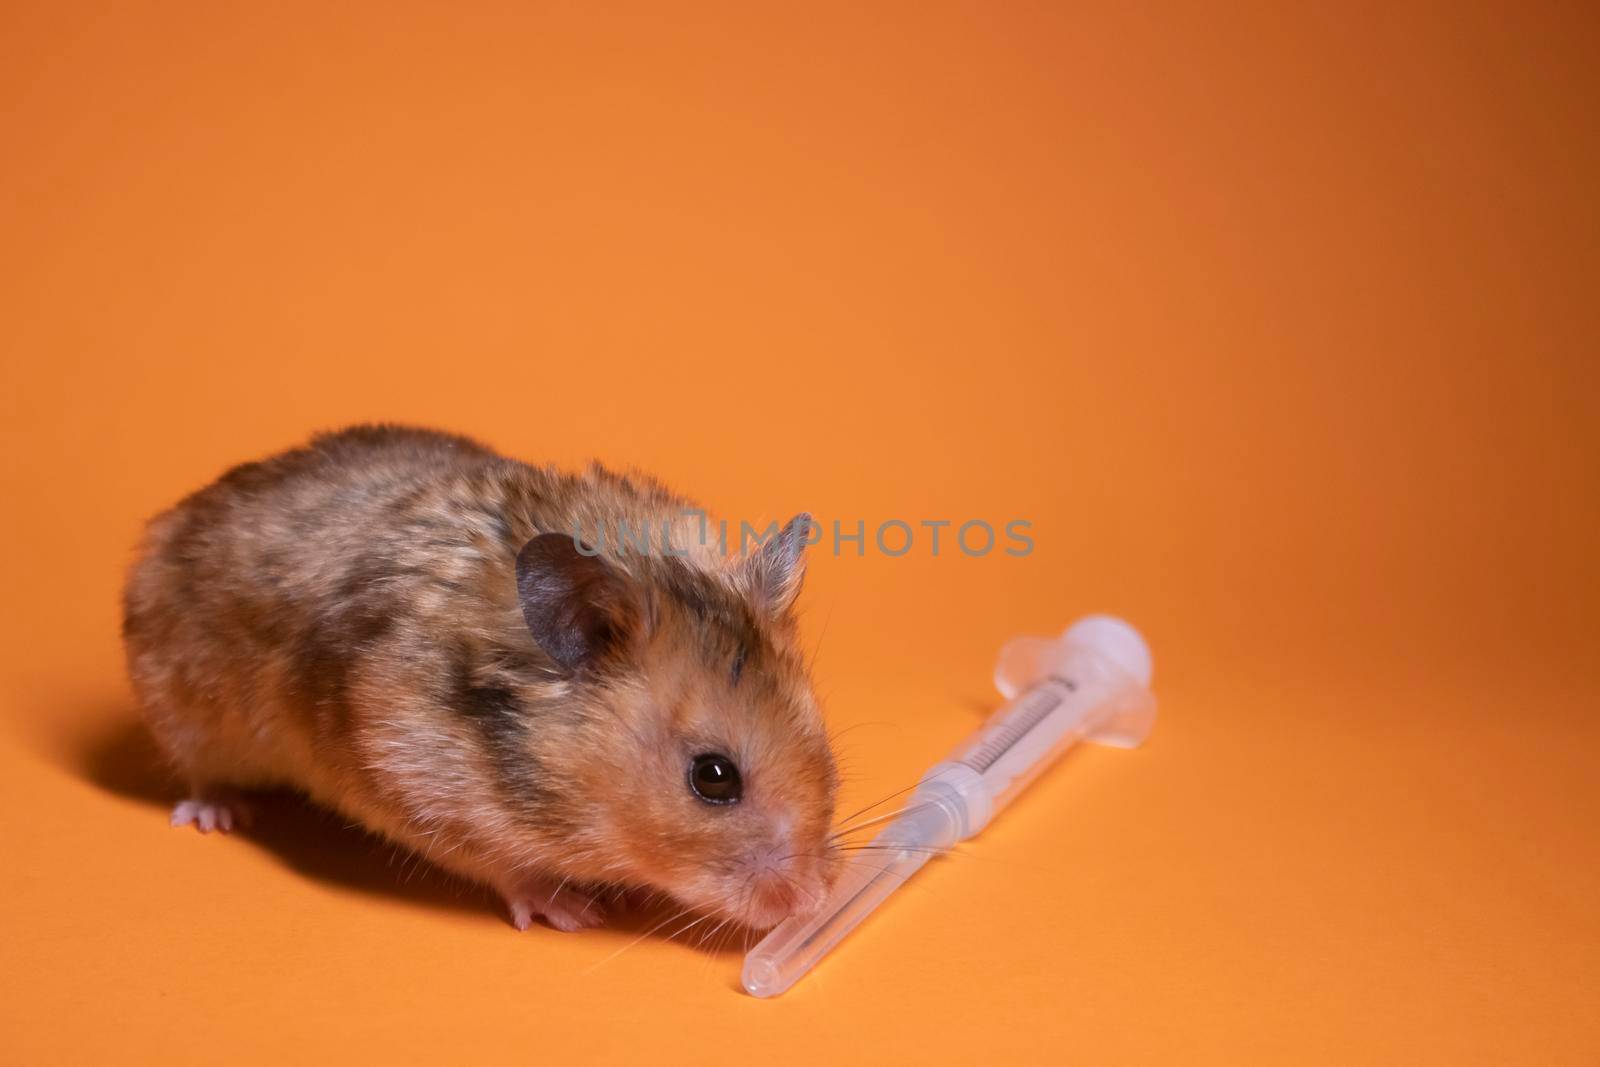 brown hamster - mouse near medical syringe with a needle isolated on orange background. medical experiments, tests on mice. copy space. veterinary